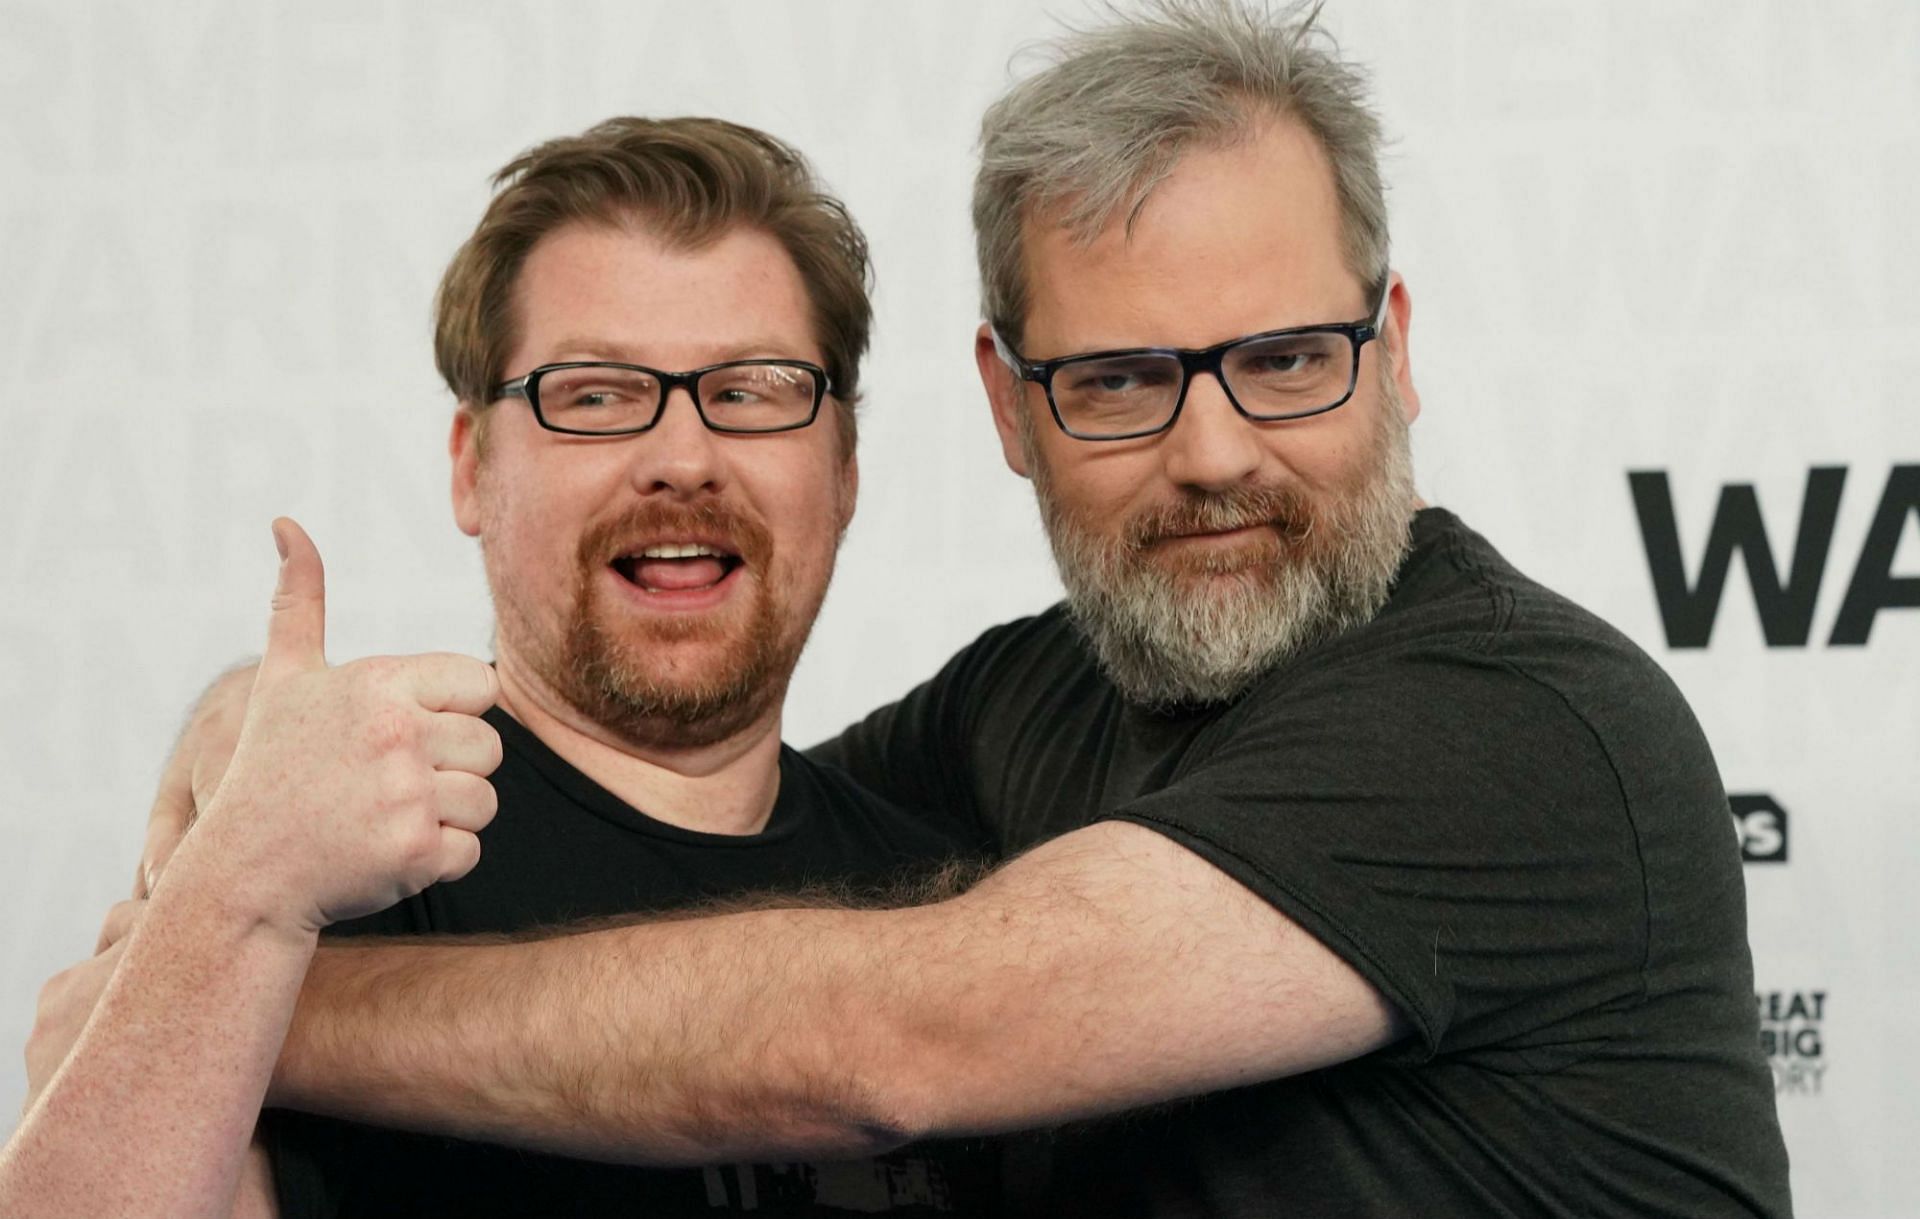 Adult Swim cuts ties with Roiland and recasts voice roles with Dan Harmon (Image via Getty Images)